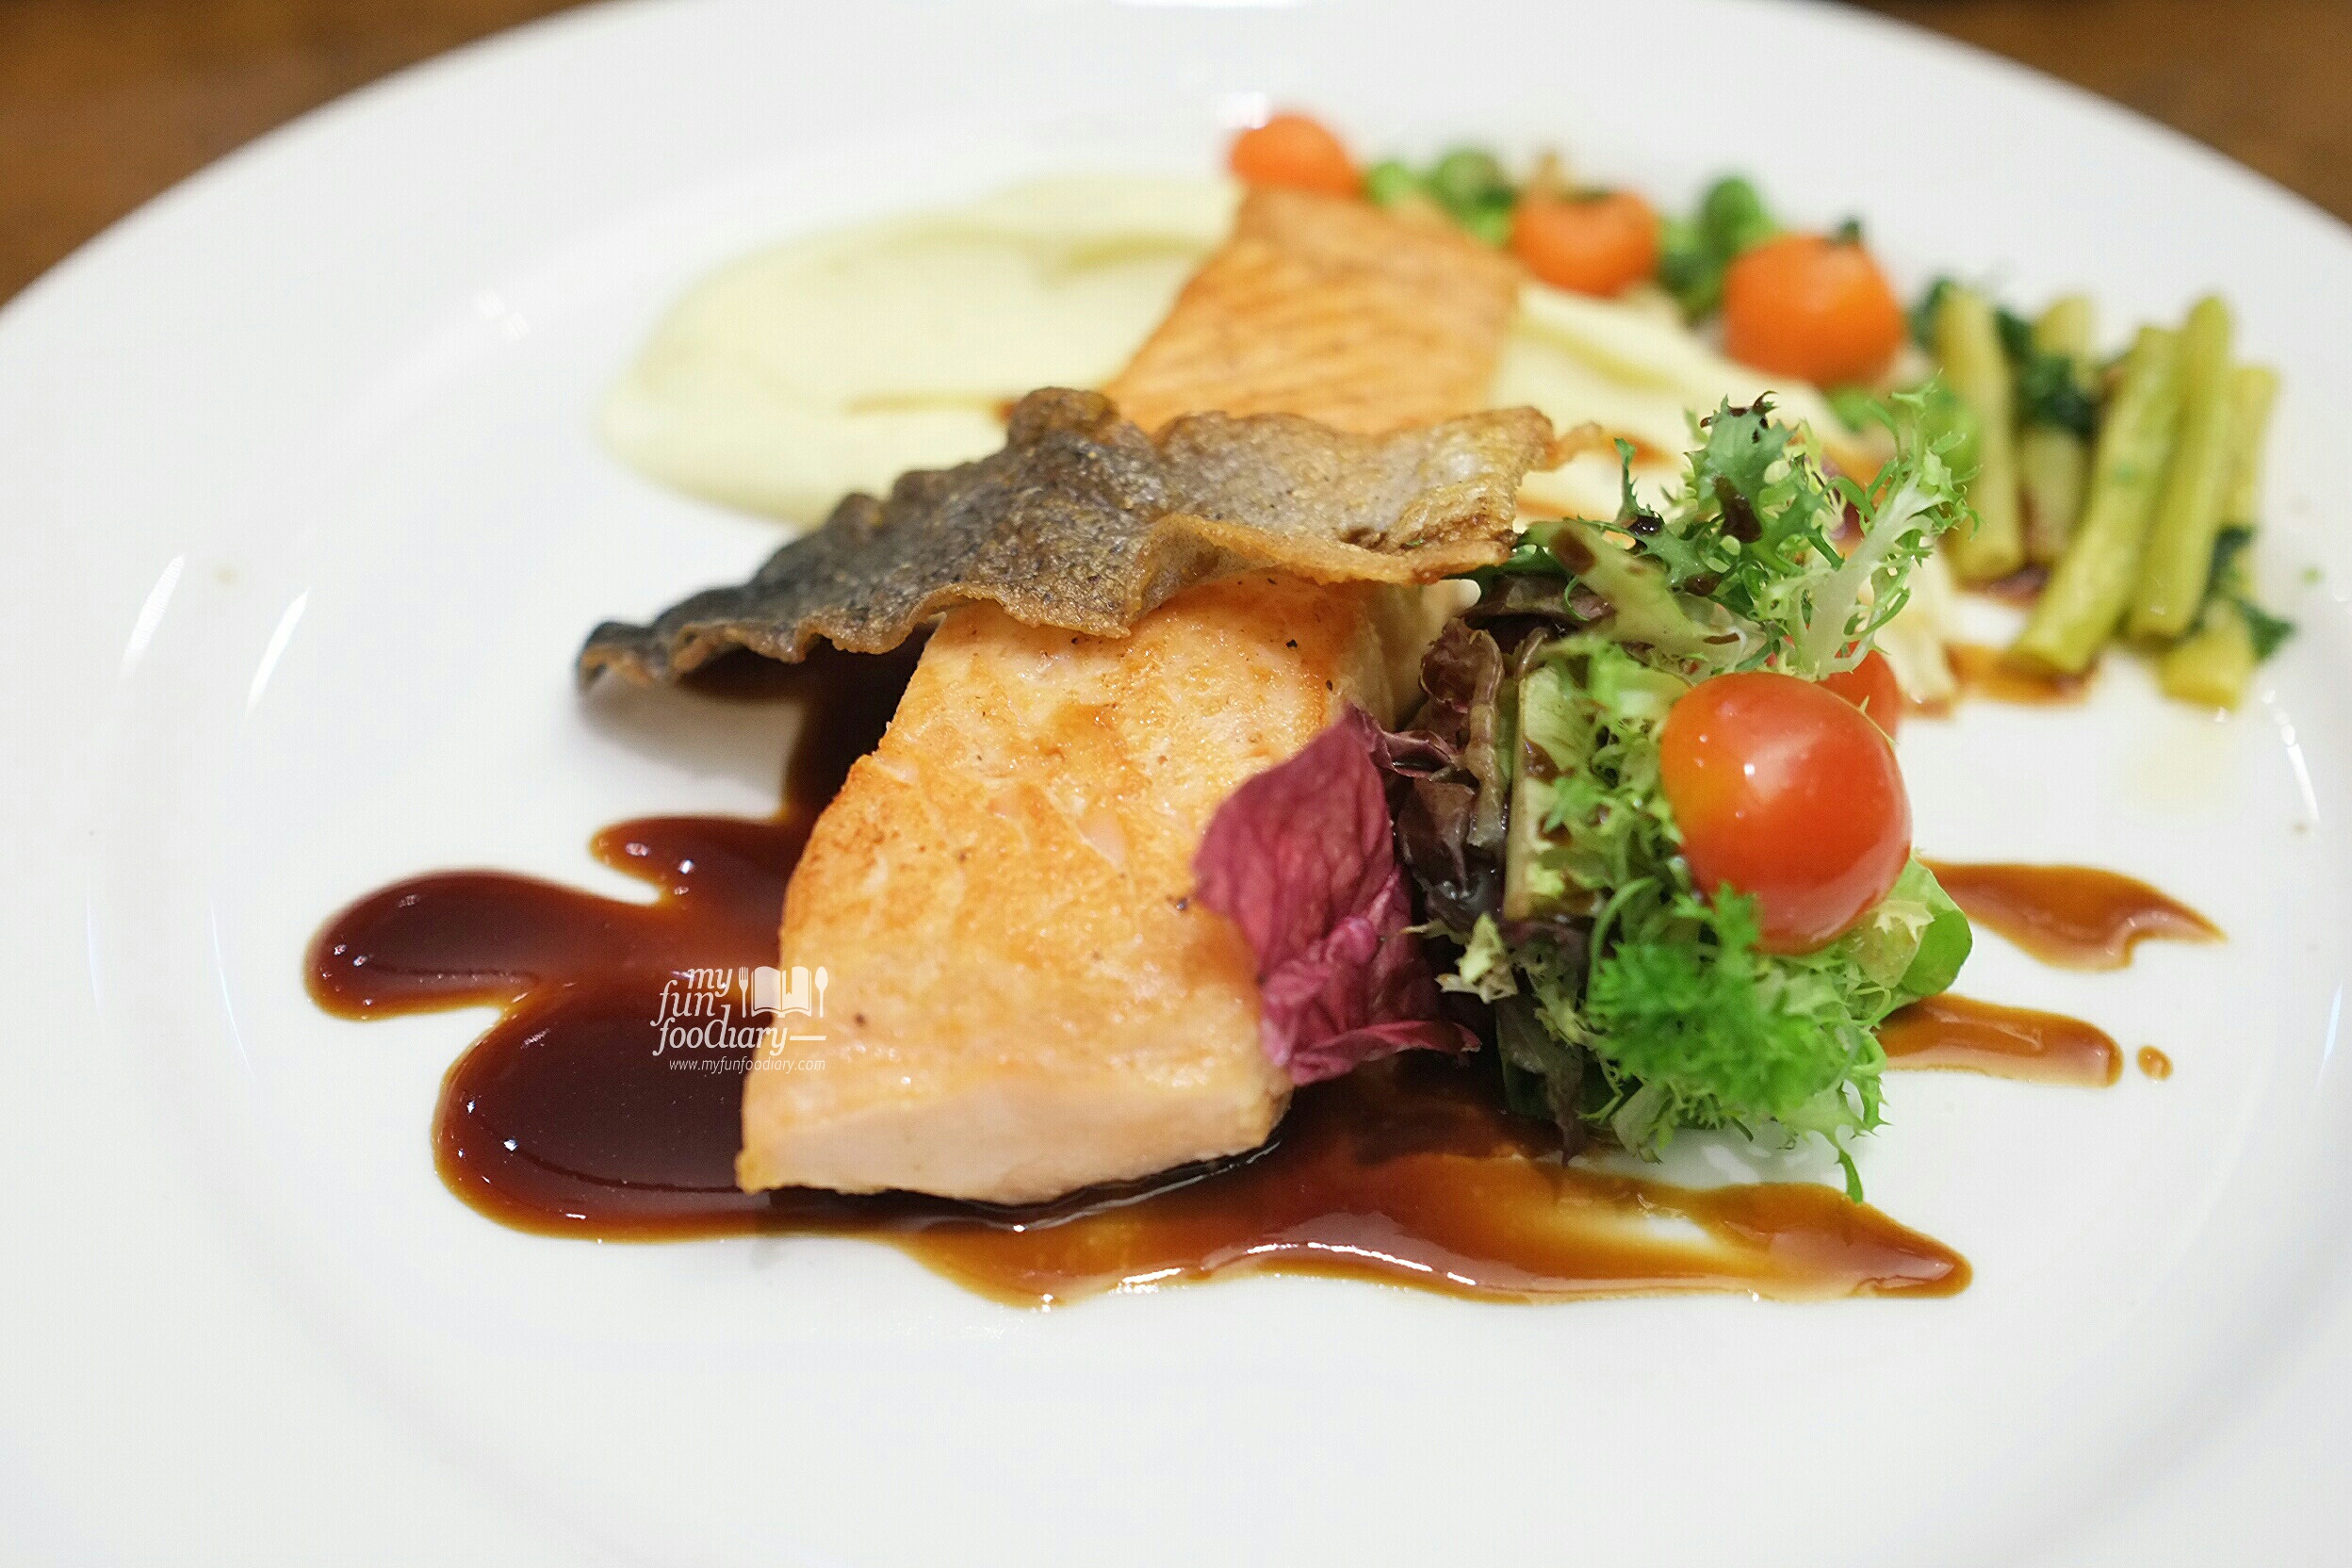 Pan Seared Crispy Skin Salmon made by me at our Cooking Class with Artotel Thamrin by Myfunfoodiary